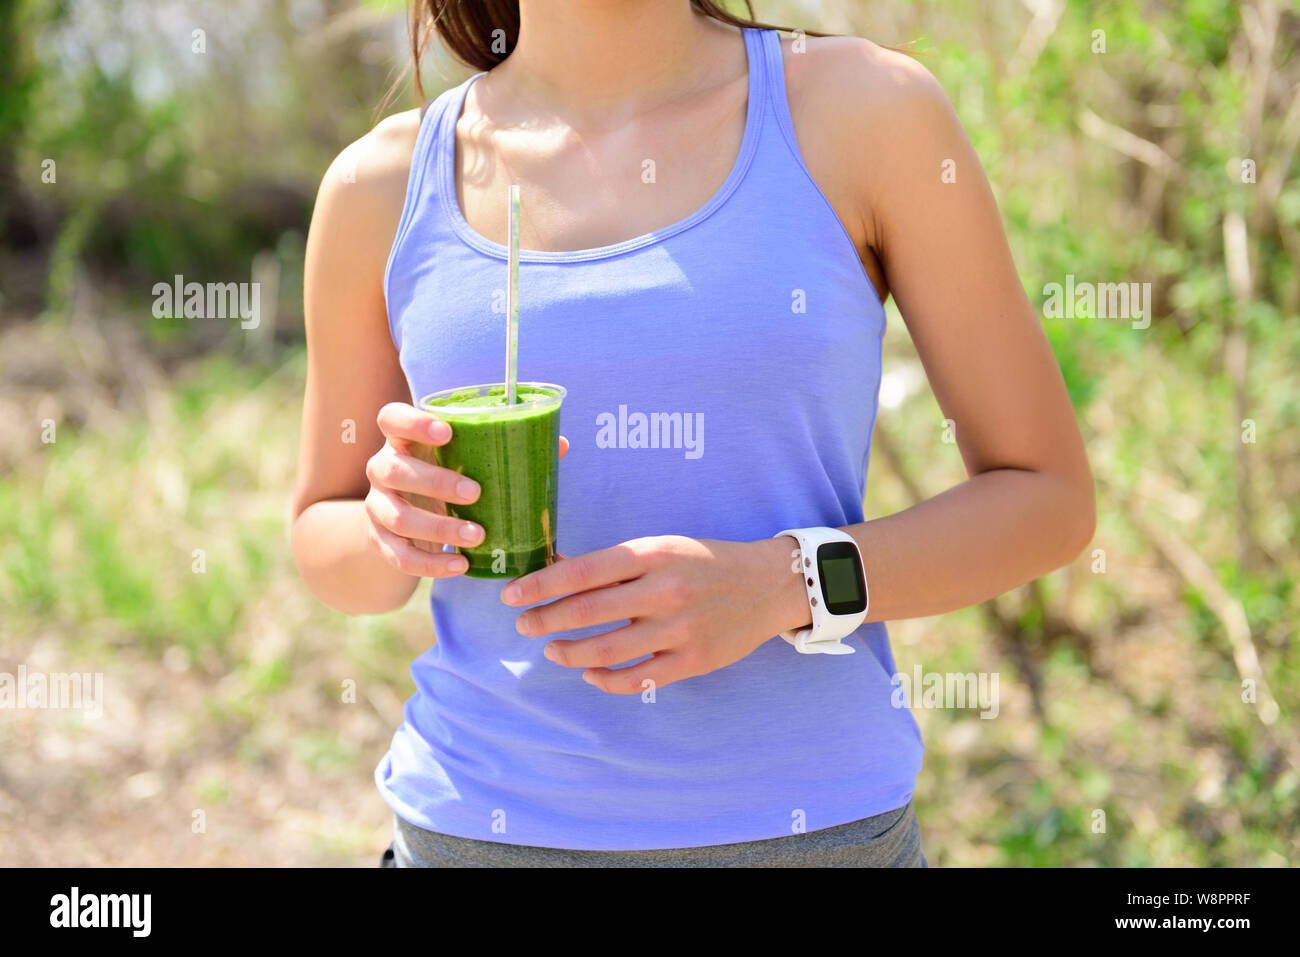 Green smoothie - woman runner wearing smartwatch. Healthy woman drinking vegetable smoothie wearing smart watch heart rate monitor during outdoor running workout in forest. Stock Photo